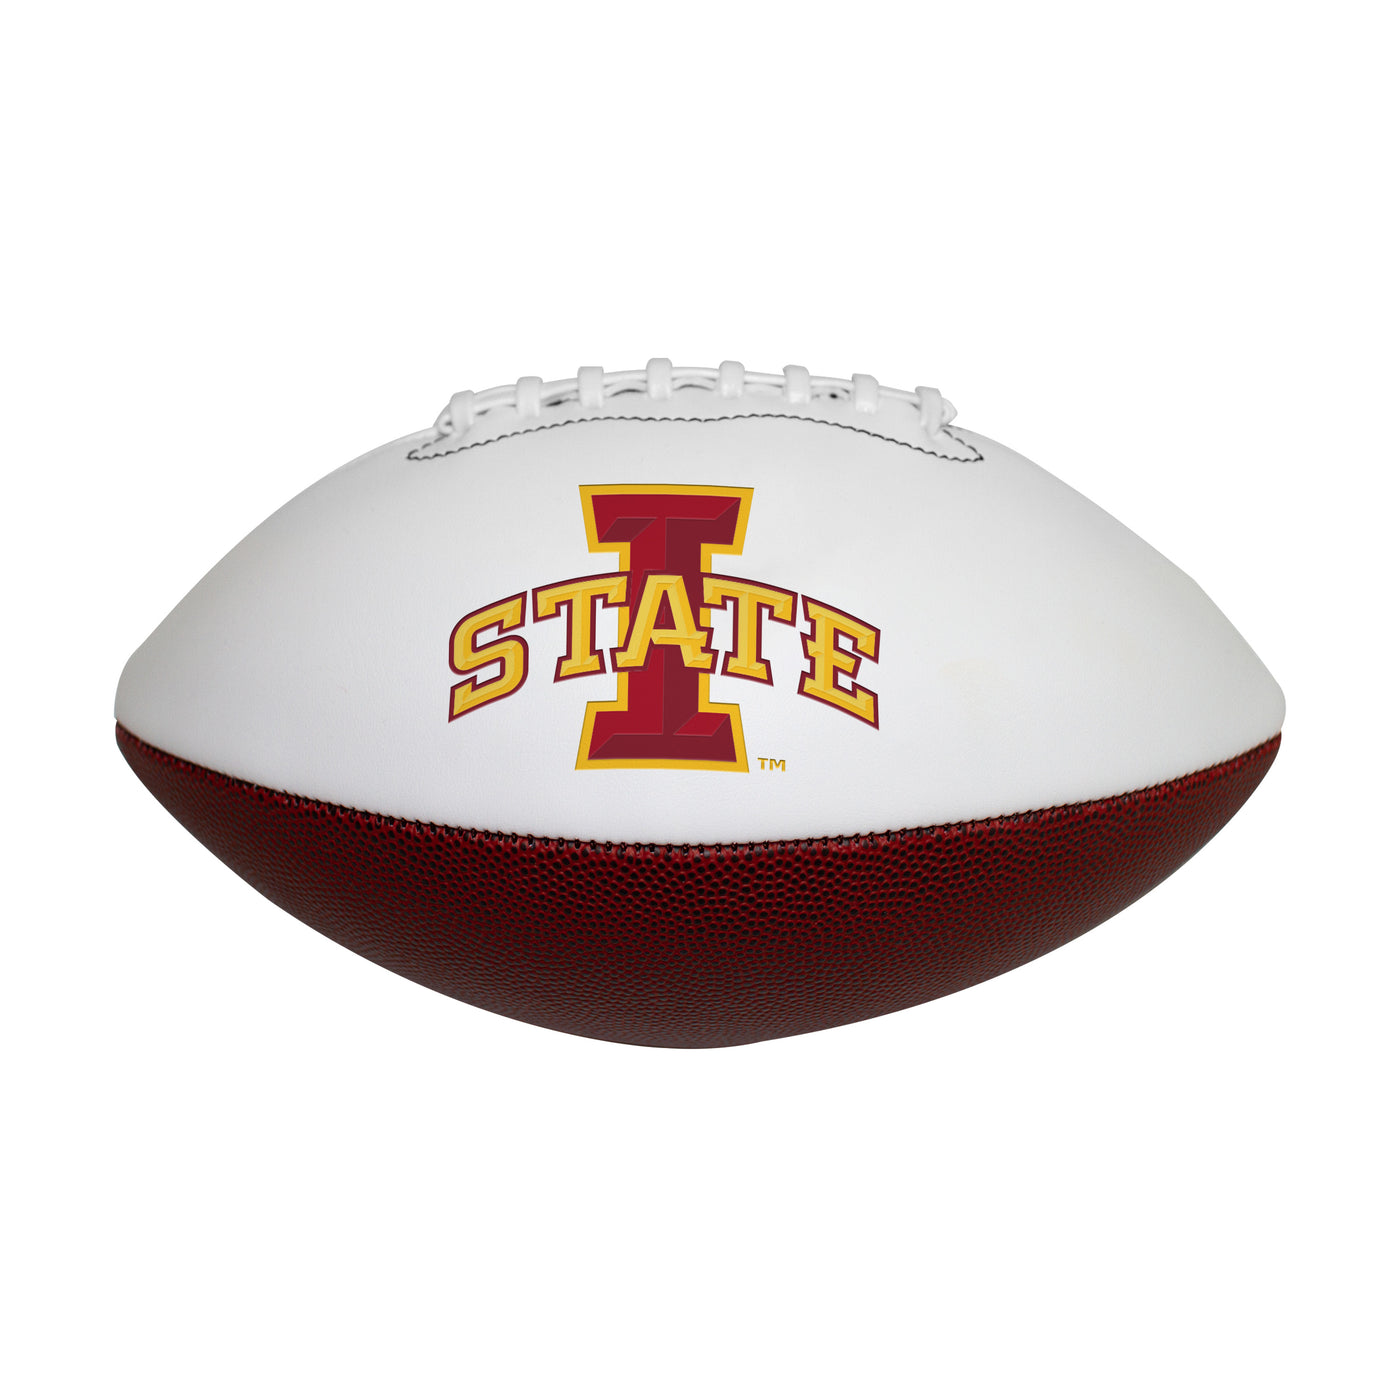 IA State Official-Size Autograph Football